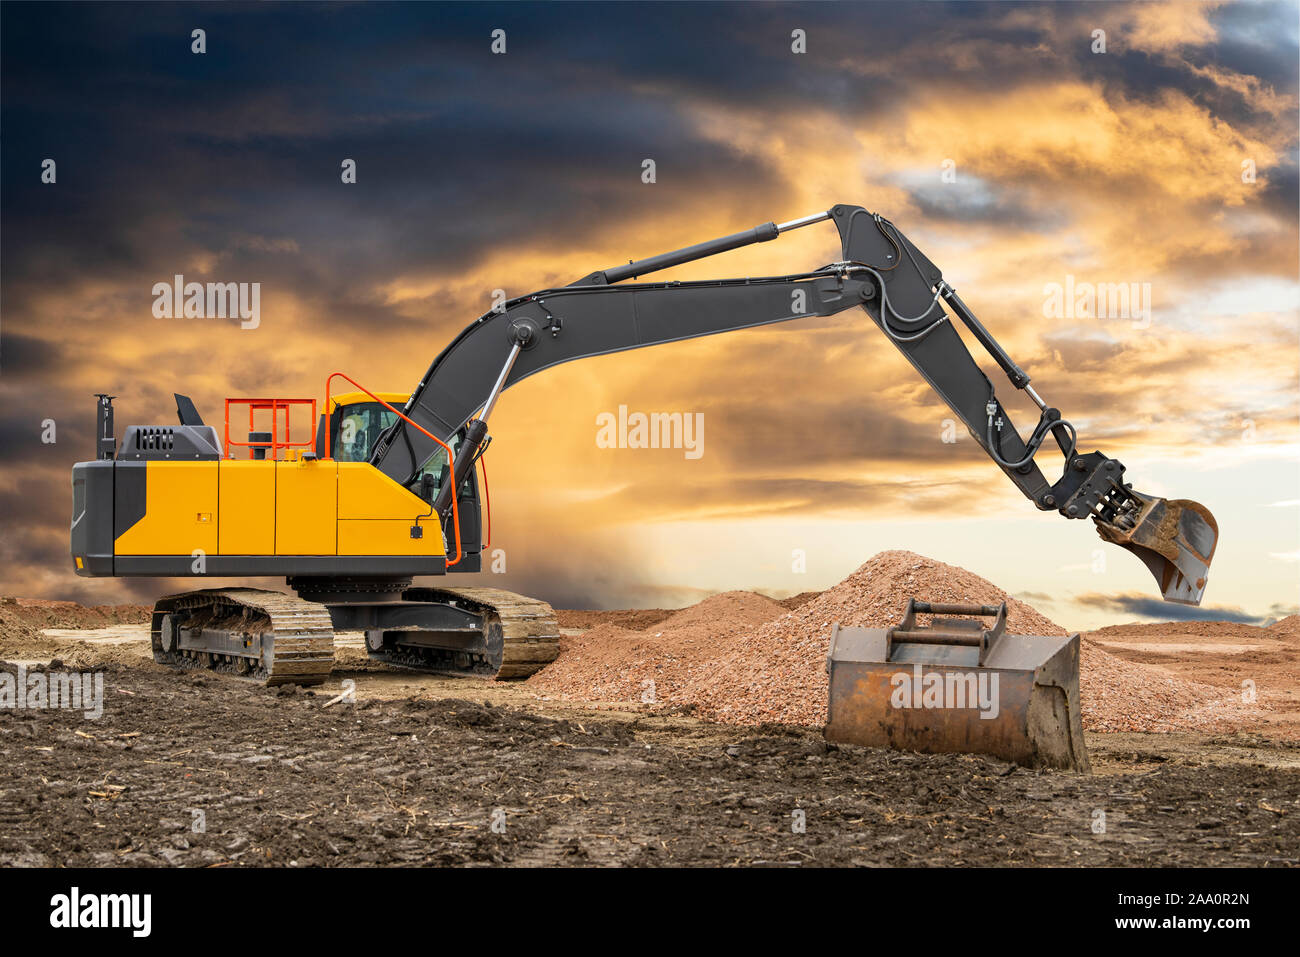 Excavator on a construction site Stock Photo